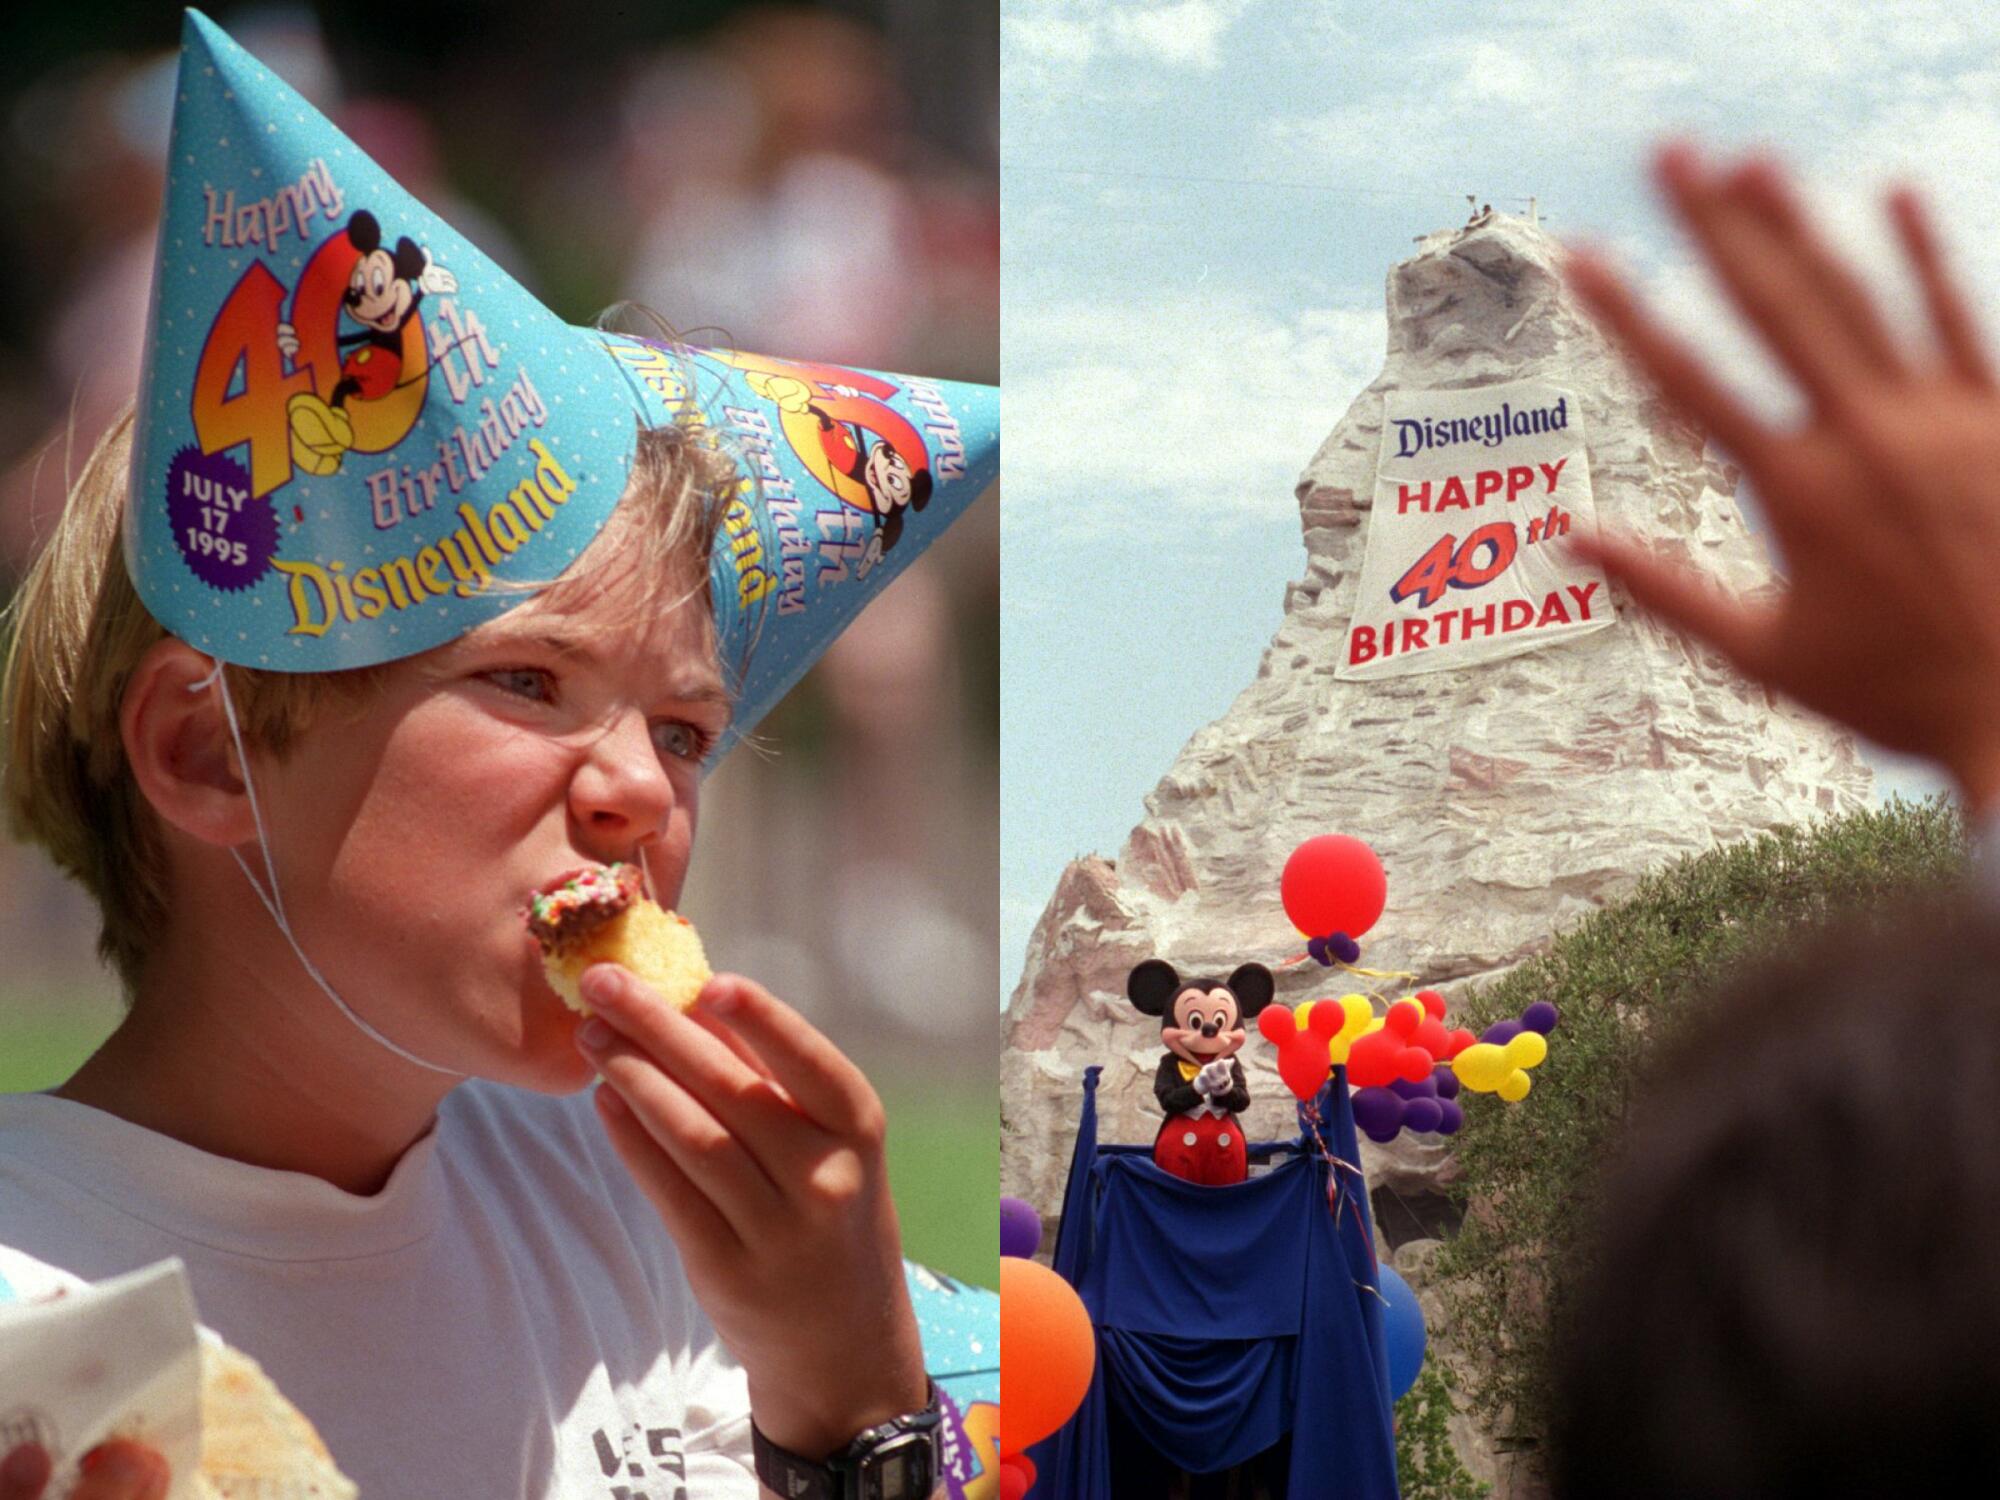 Two images: a boy bites into a piece of cake and a sign on the Matterhorn reads: Disneyland Happy 40th Birthday